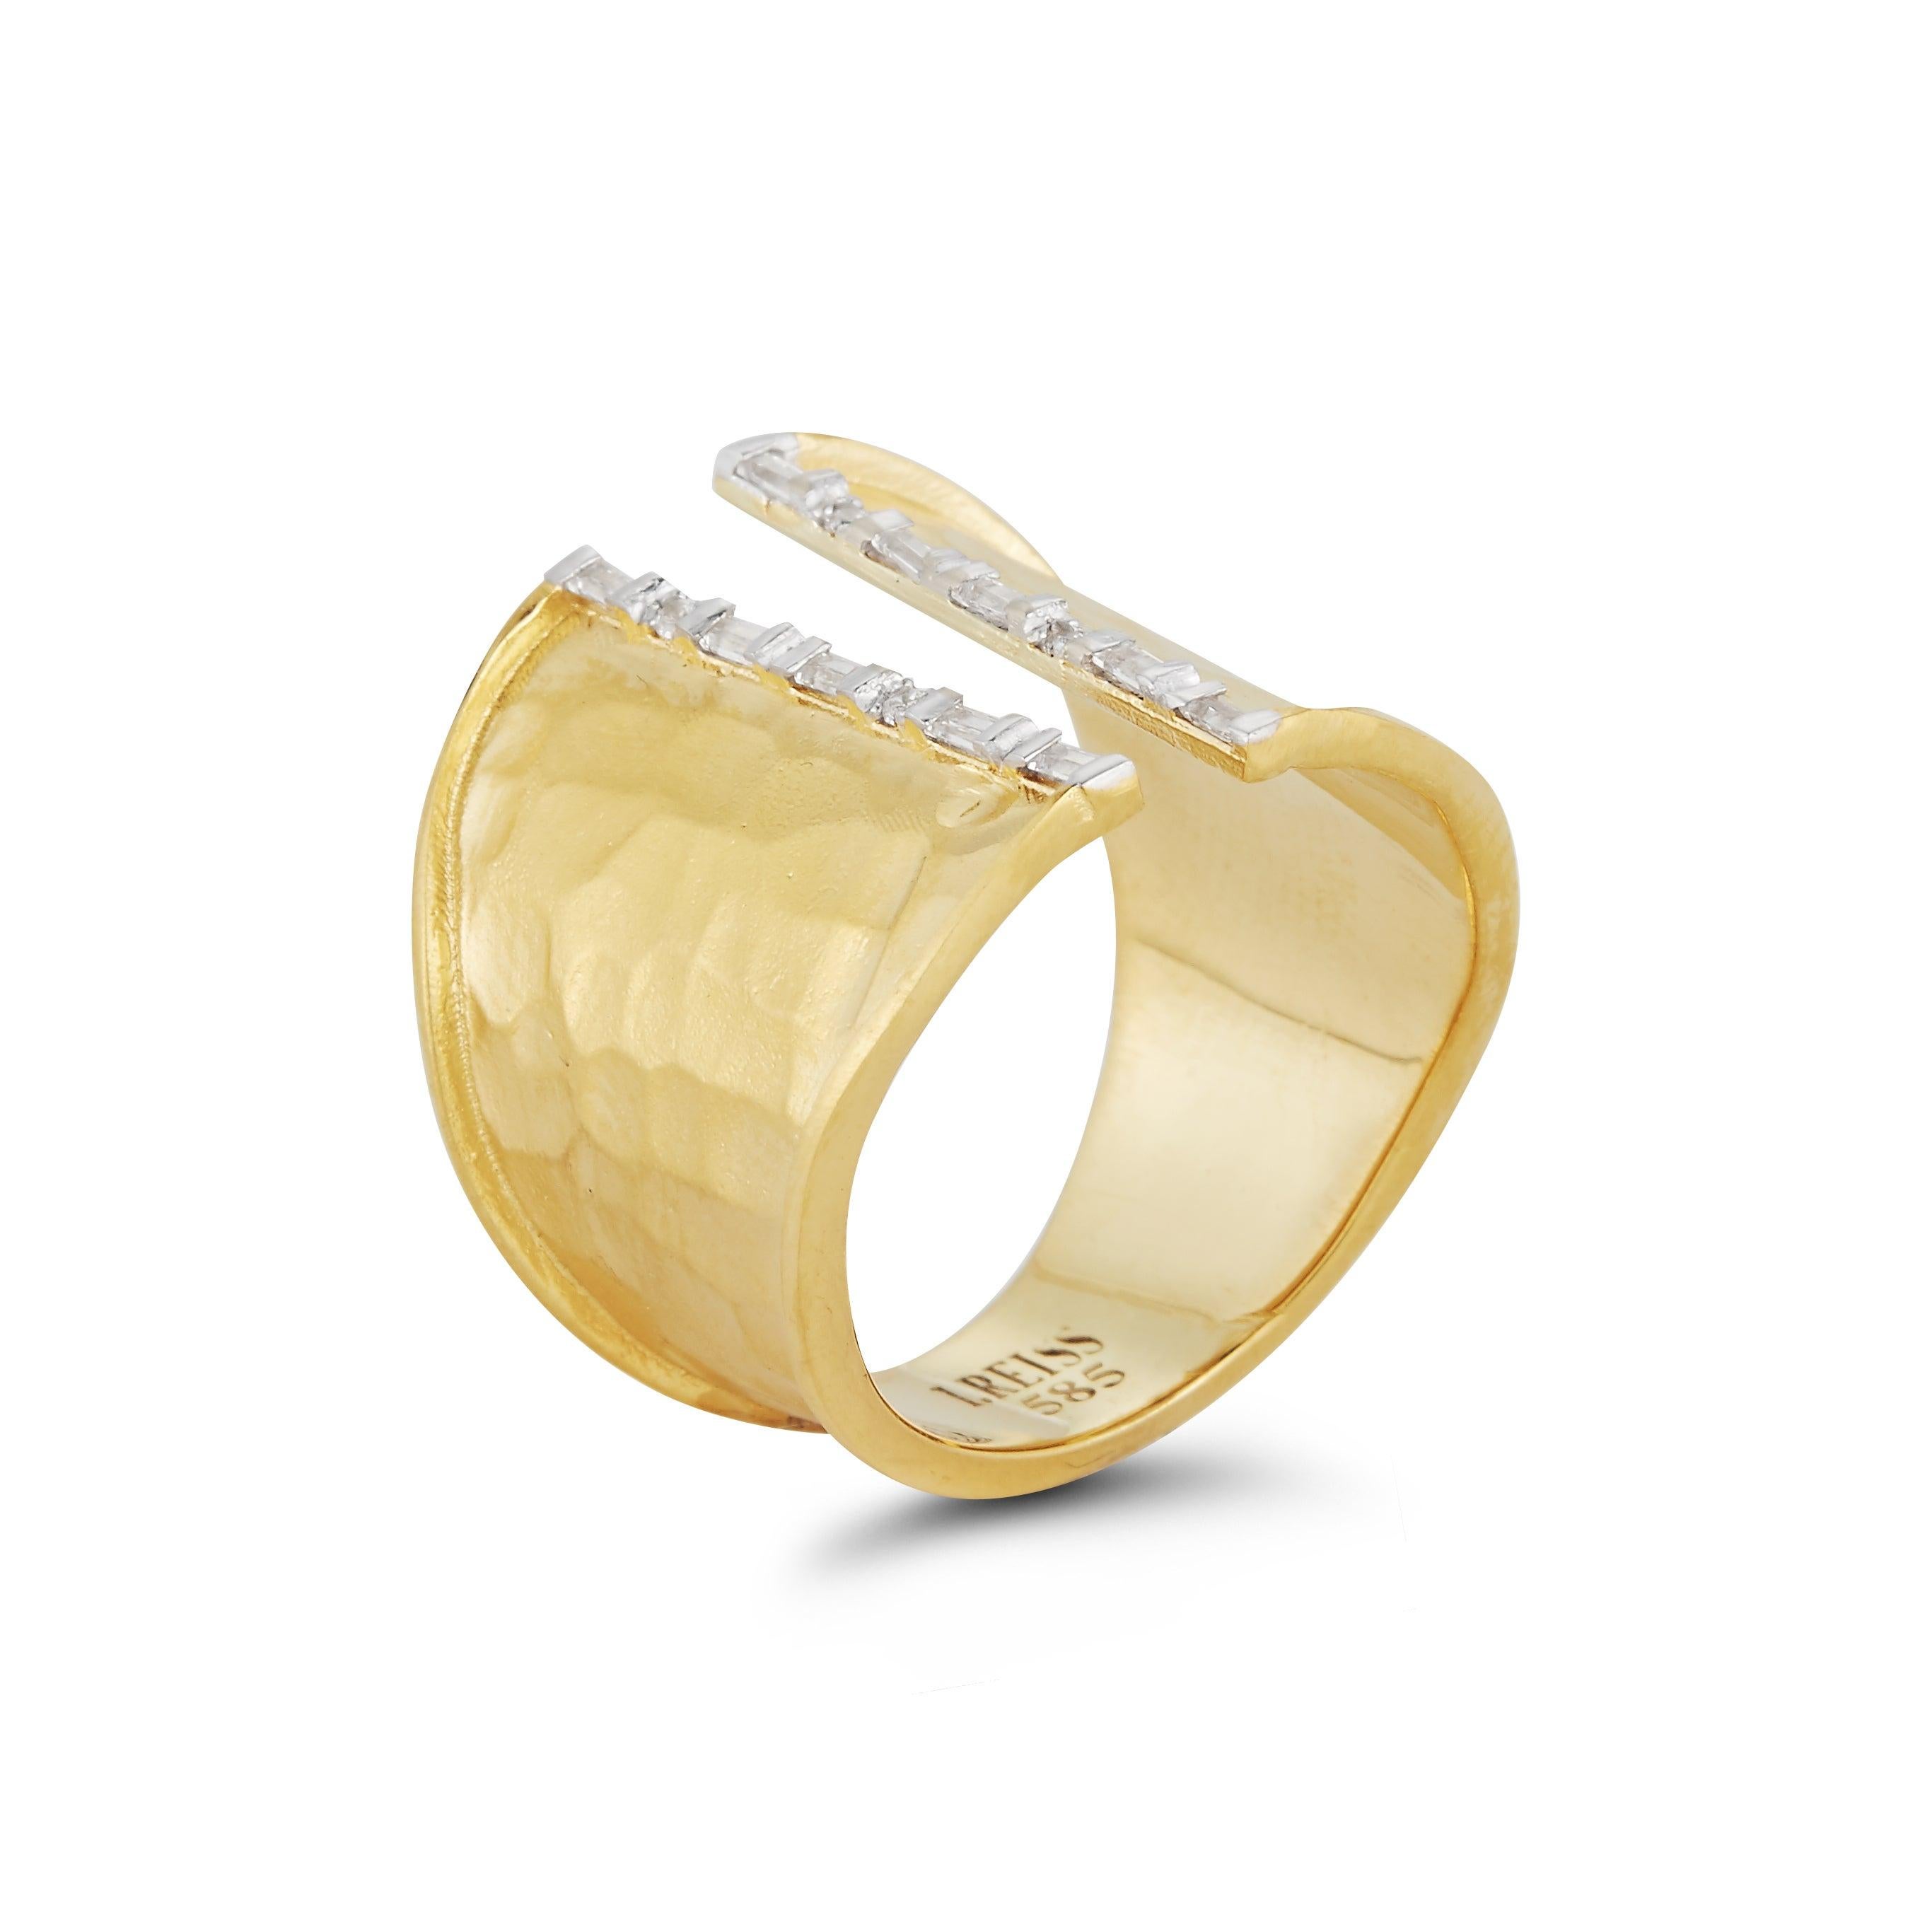 For Sale:  Handcrafted 14 Karat Yellow Gold Open Cuff Ring Set with Baguette Diamonds 3